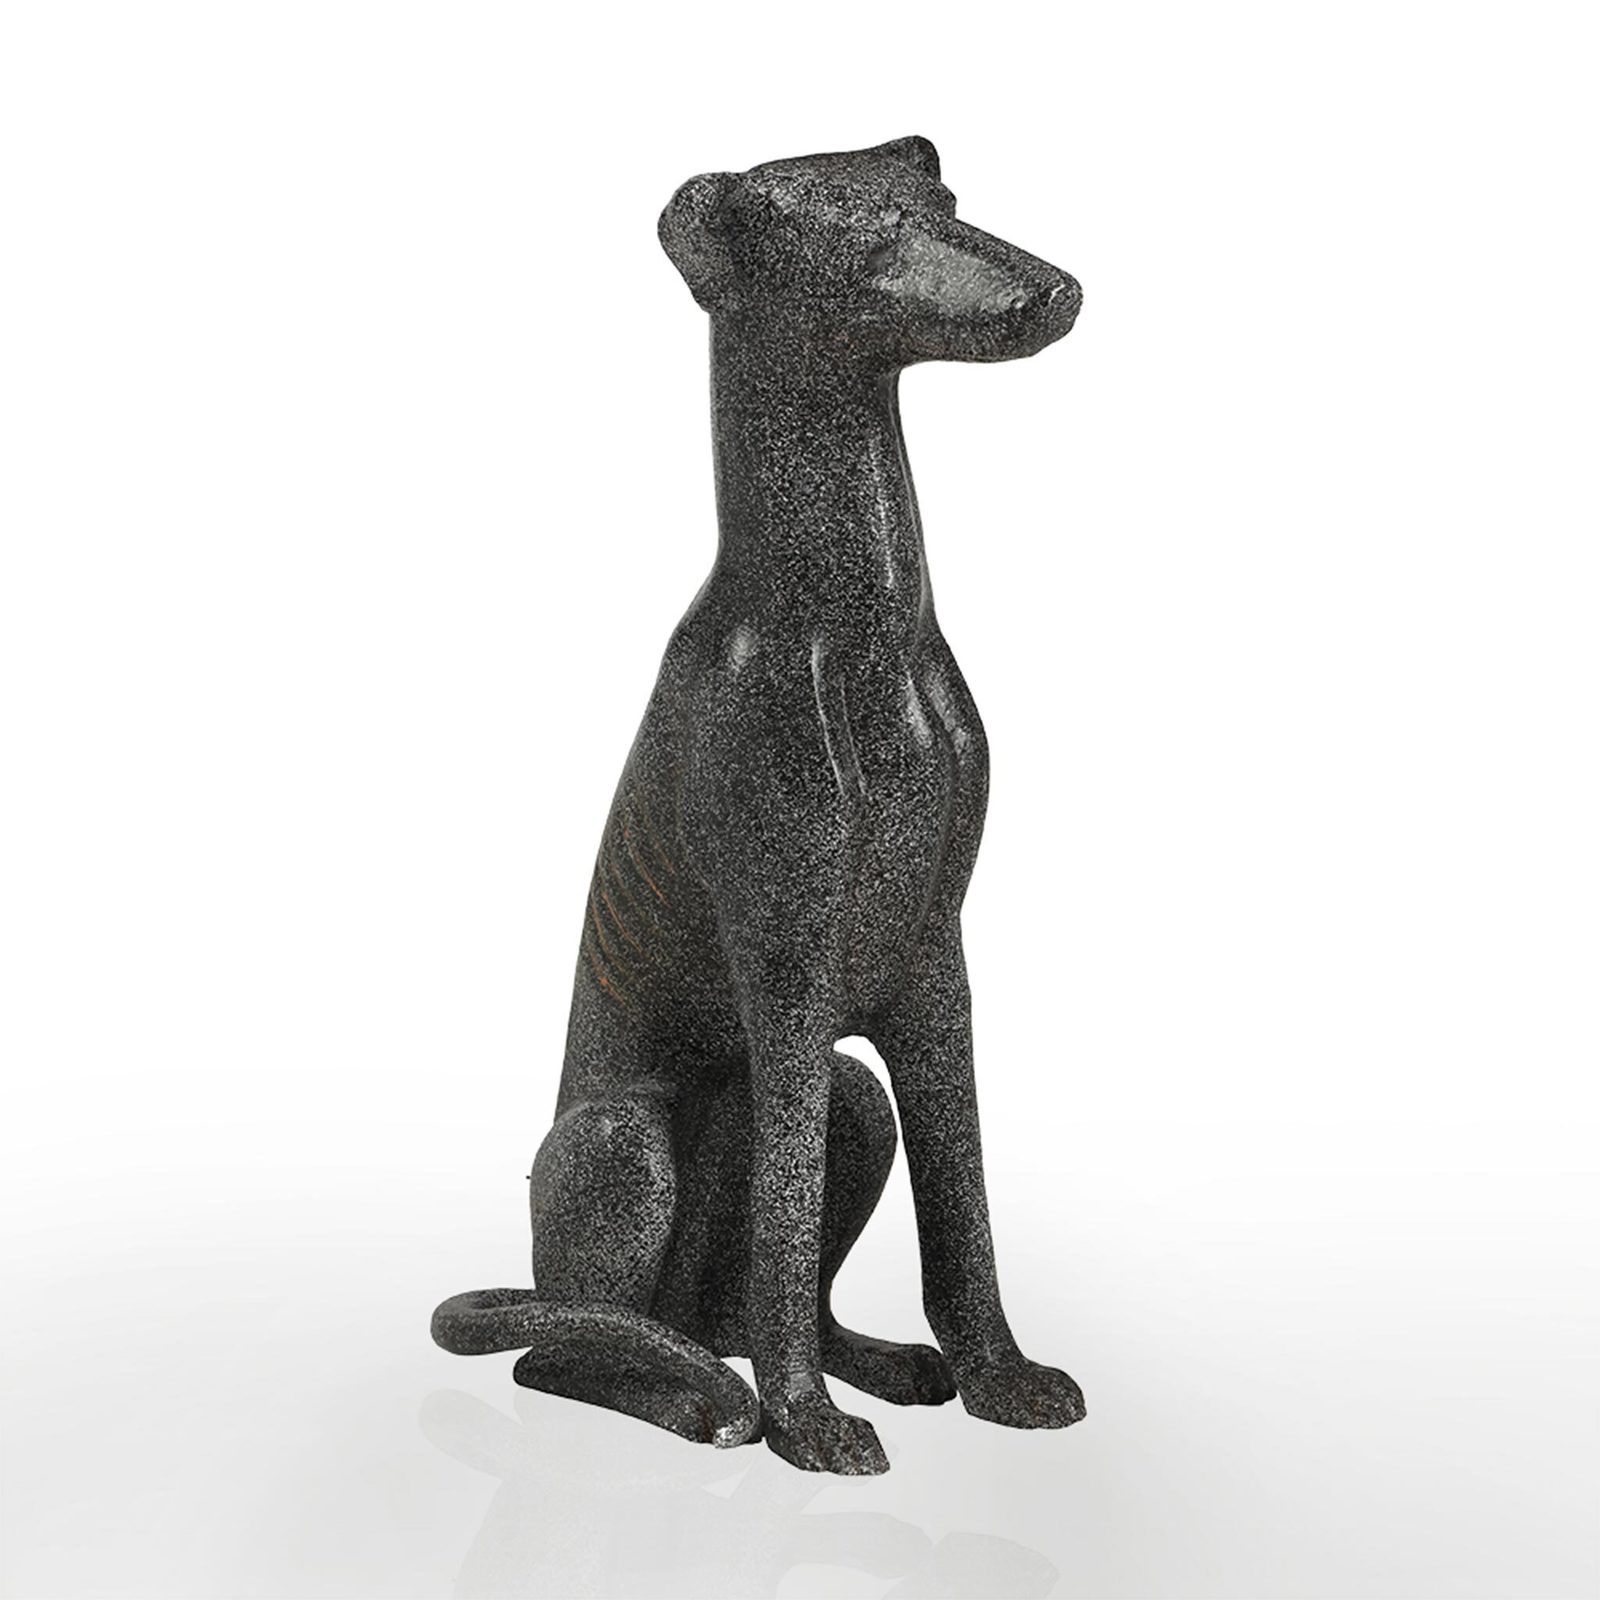 Primary image for SPI Home Cast Aluminum Loyal Greyhound Statue Sculpture 18.5 Inches High